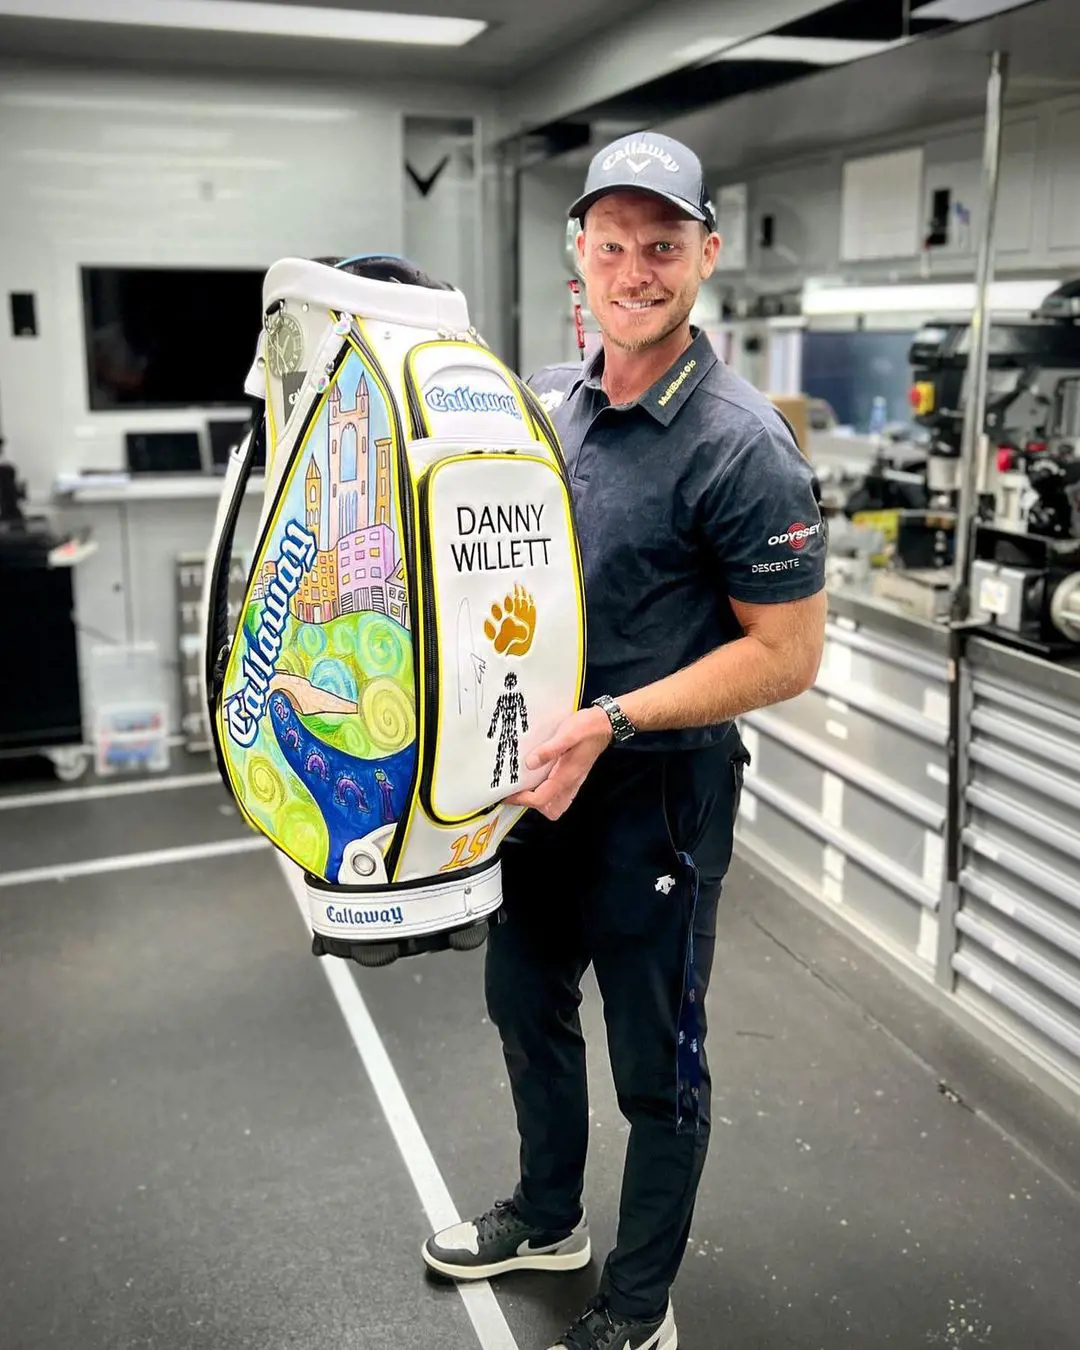 Danny Willett announces a Give Away in July 2022. On the occasion of 150th Open he offered a limited edition Callaway Staff Bag